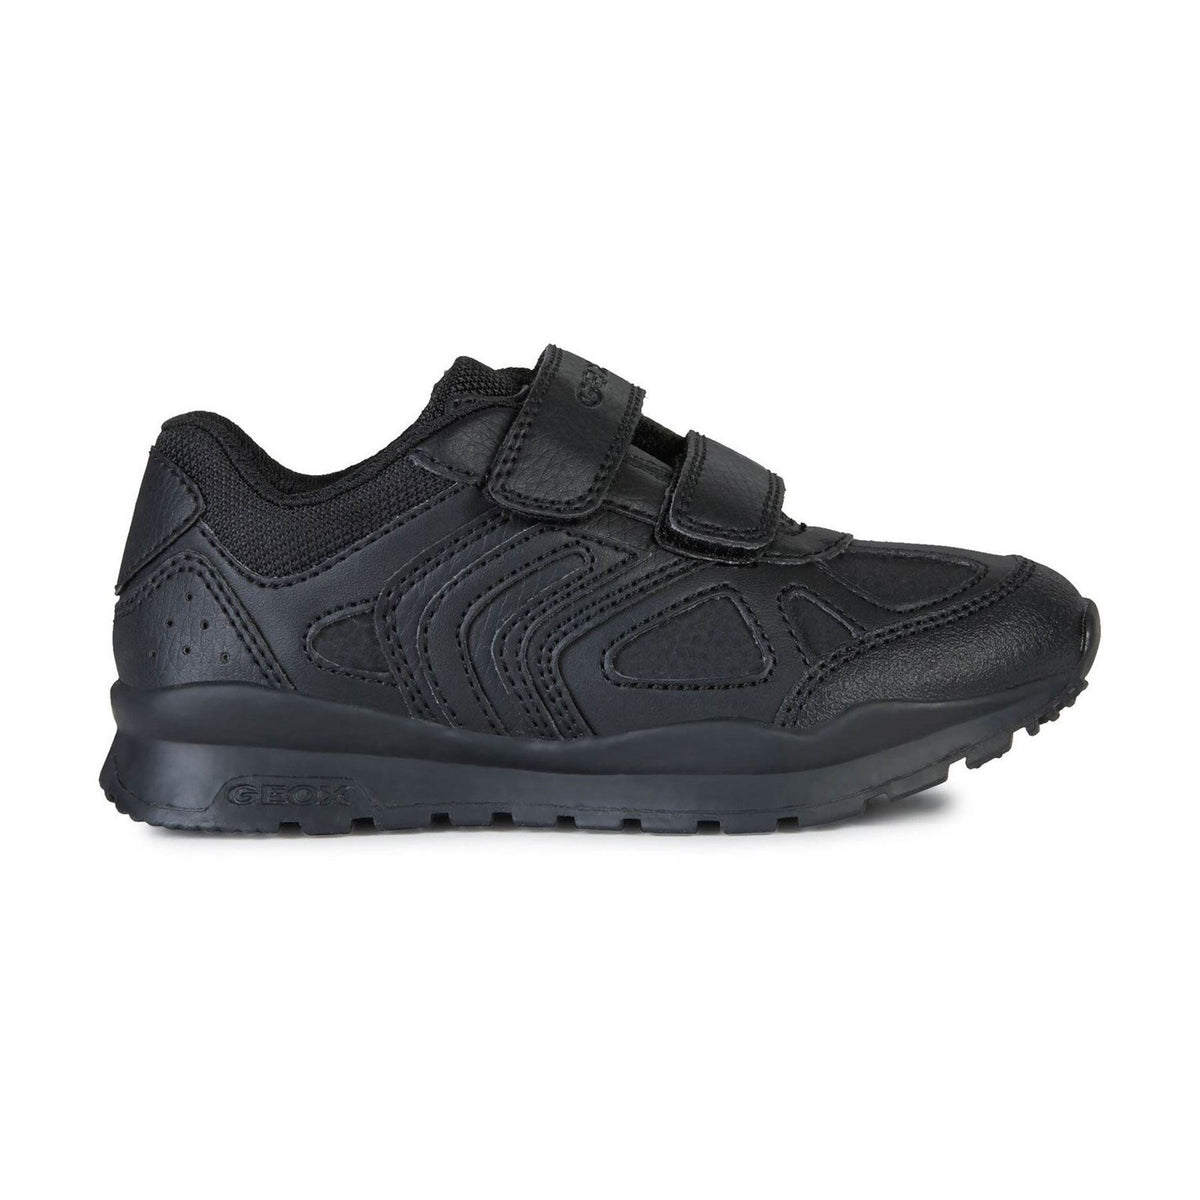 Geox Boys Black Touch Fastening Pavel School Shoes